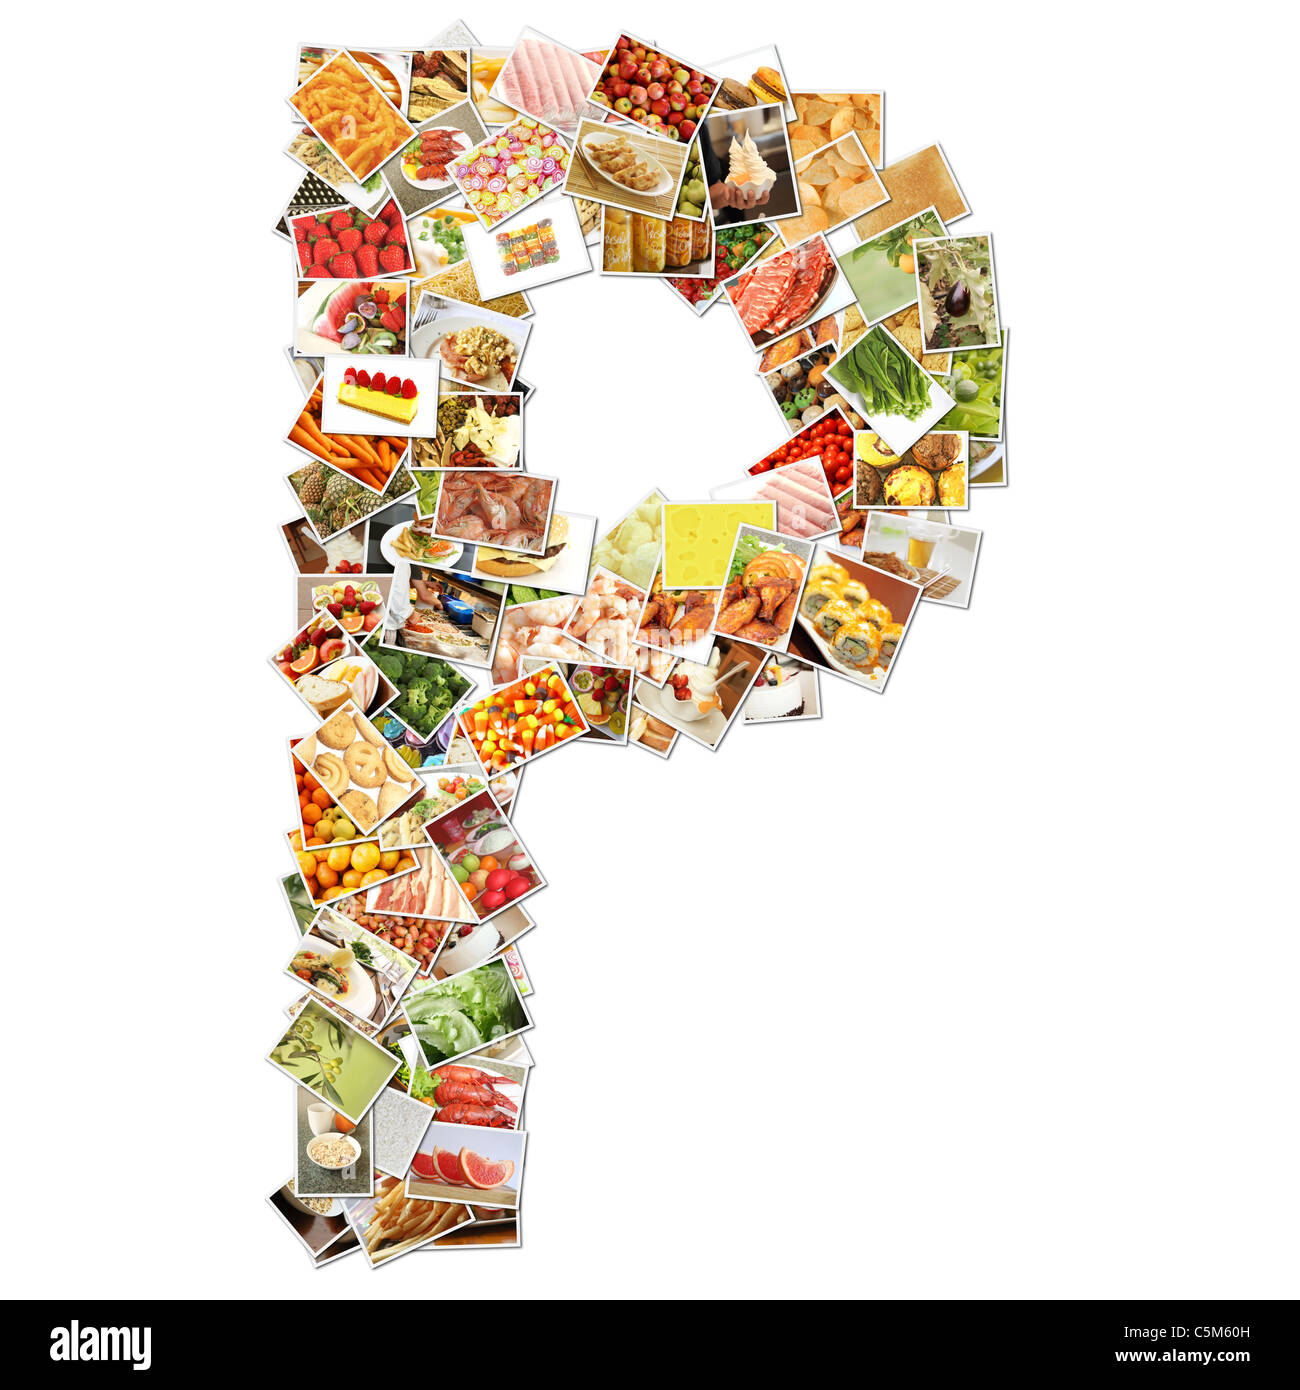 Letter P with Food Collage Concept Art Stock Photo